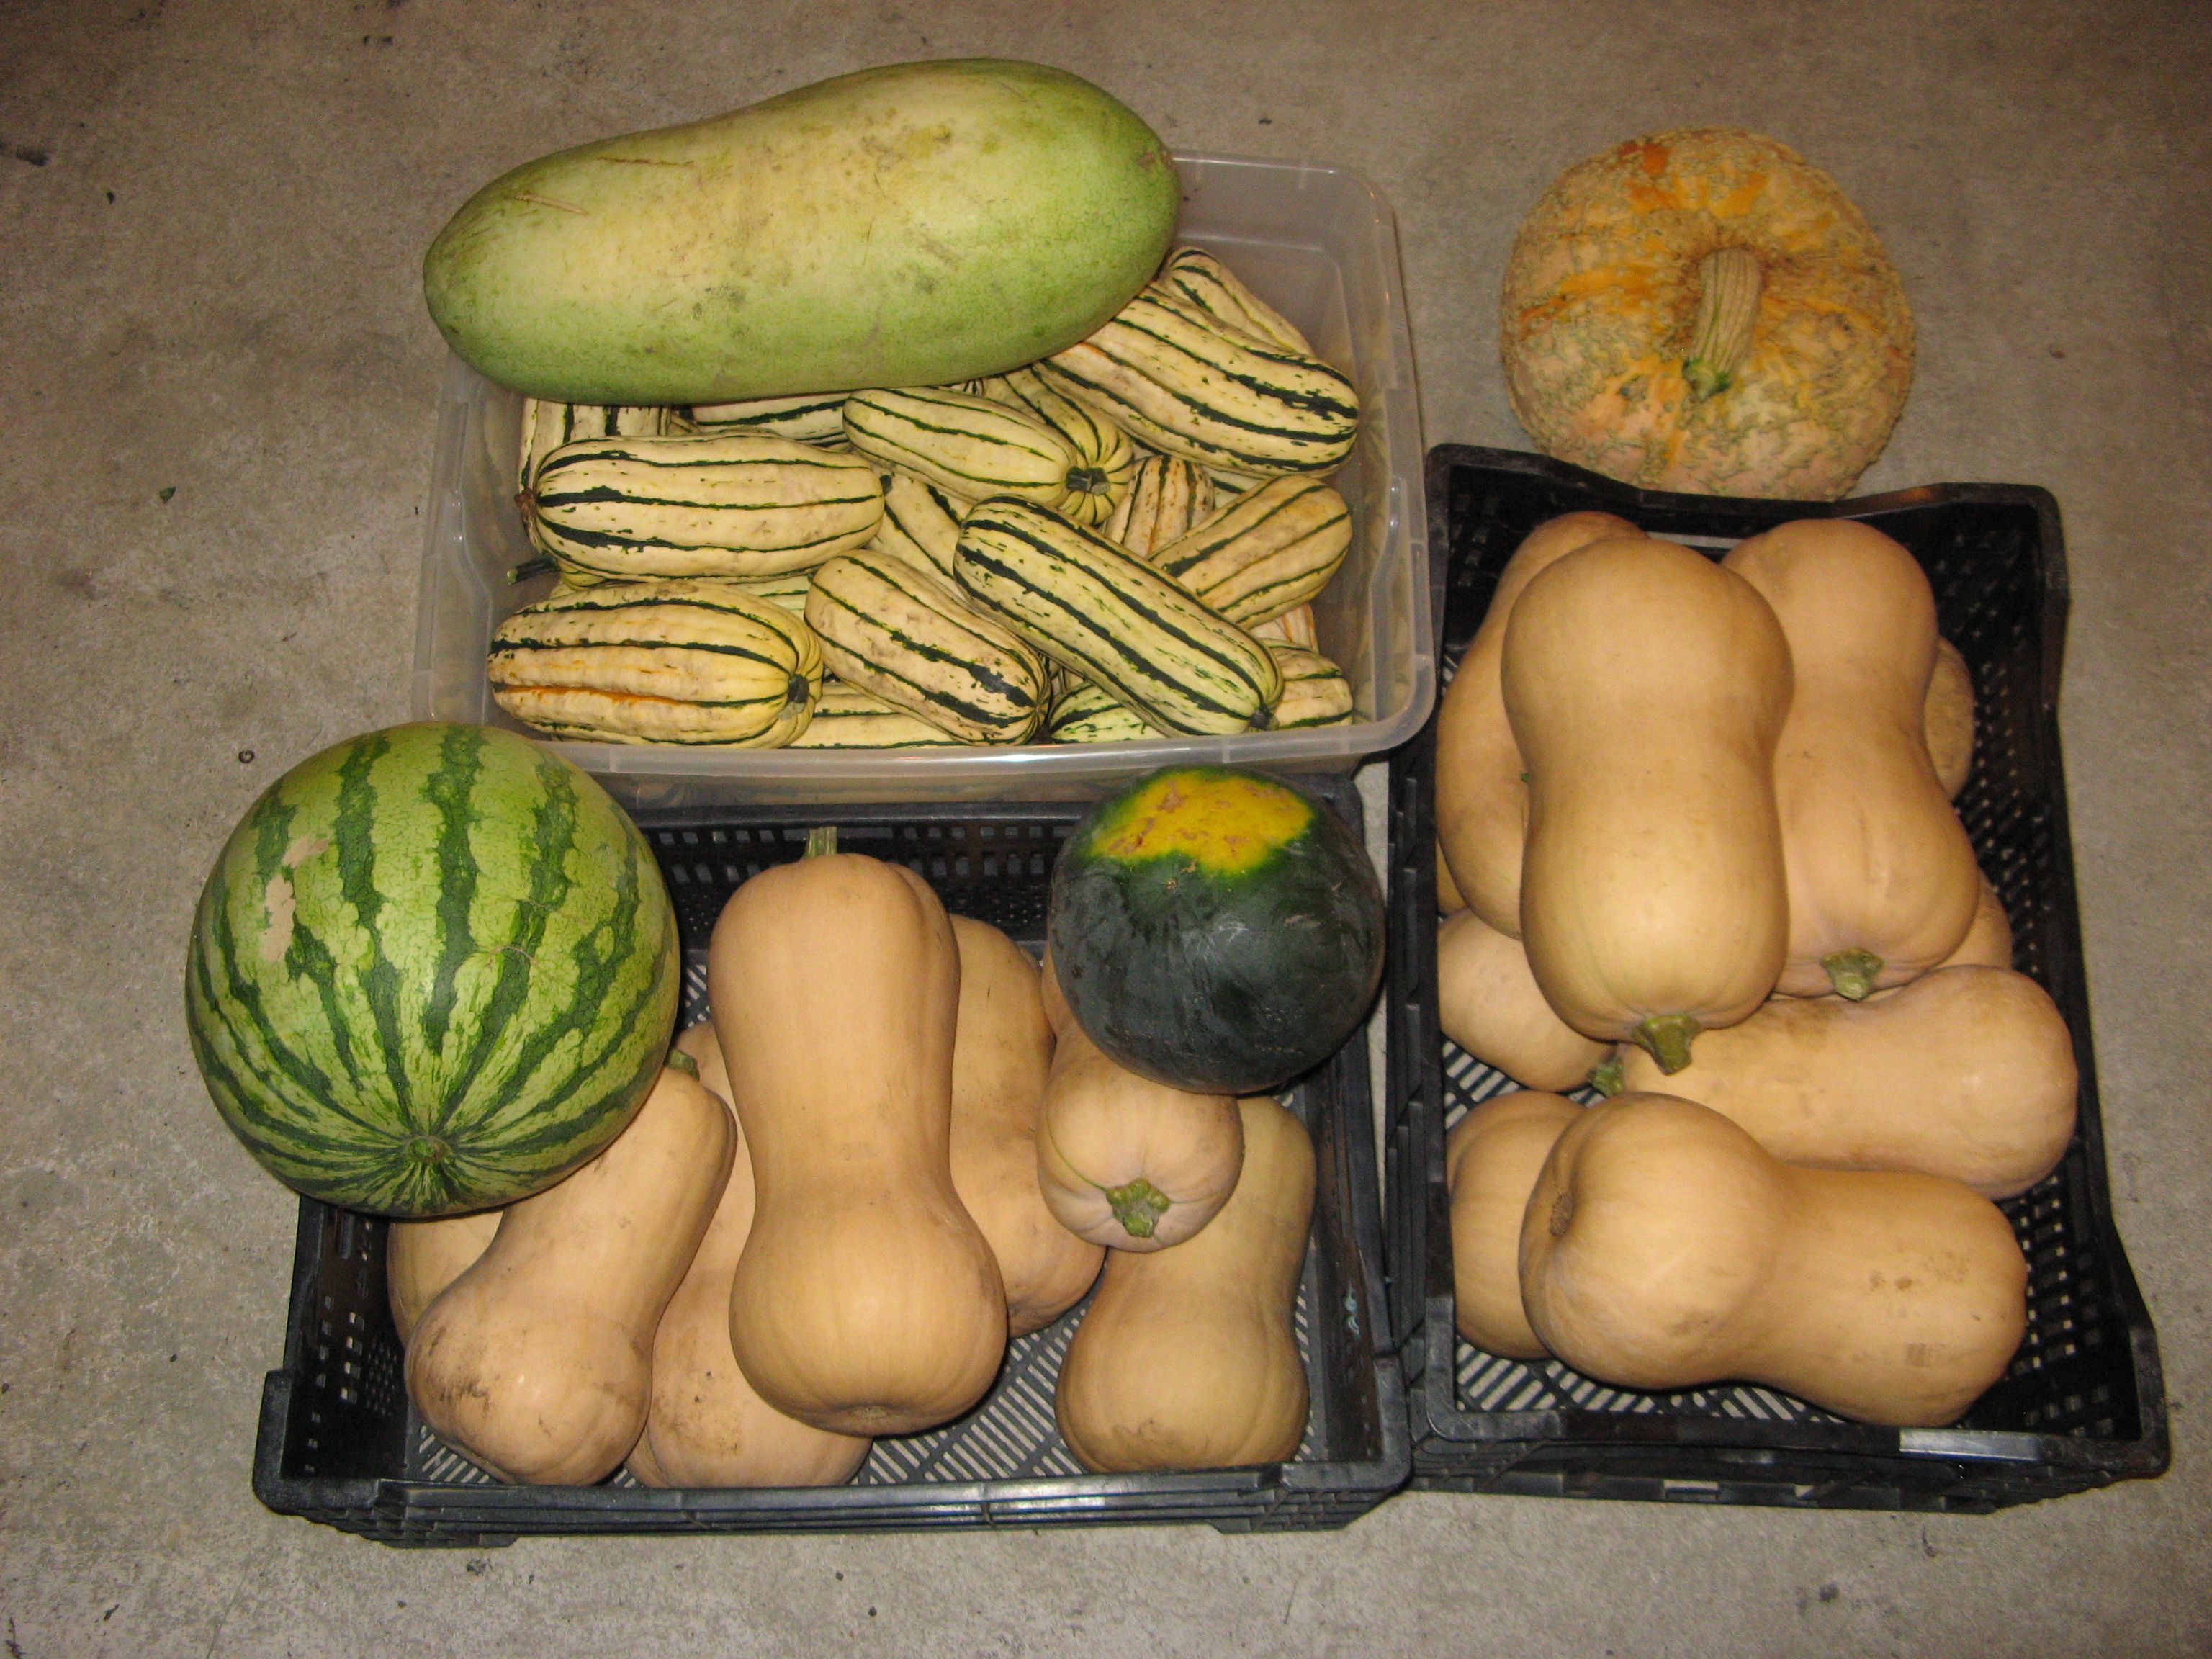 several types of melon and squash in baskets